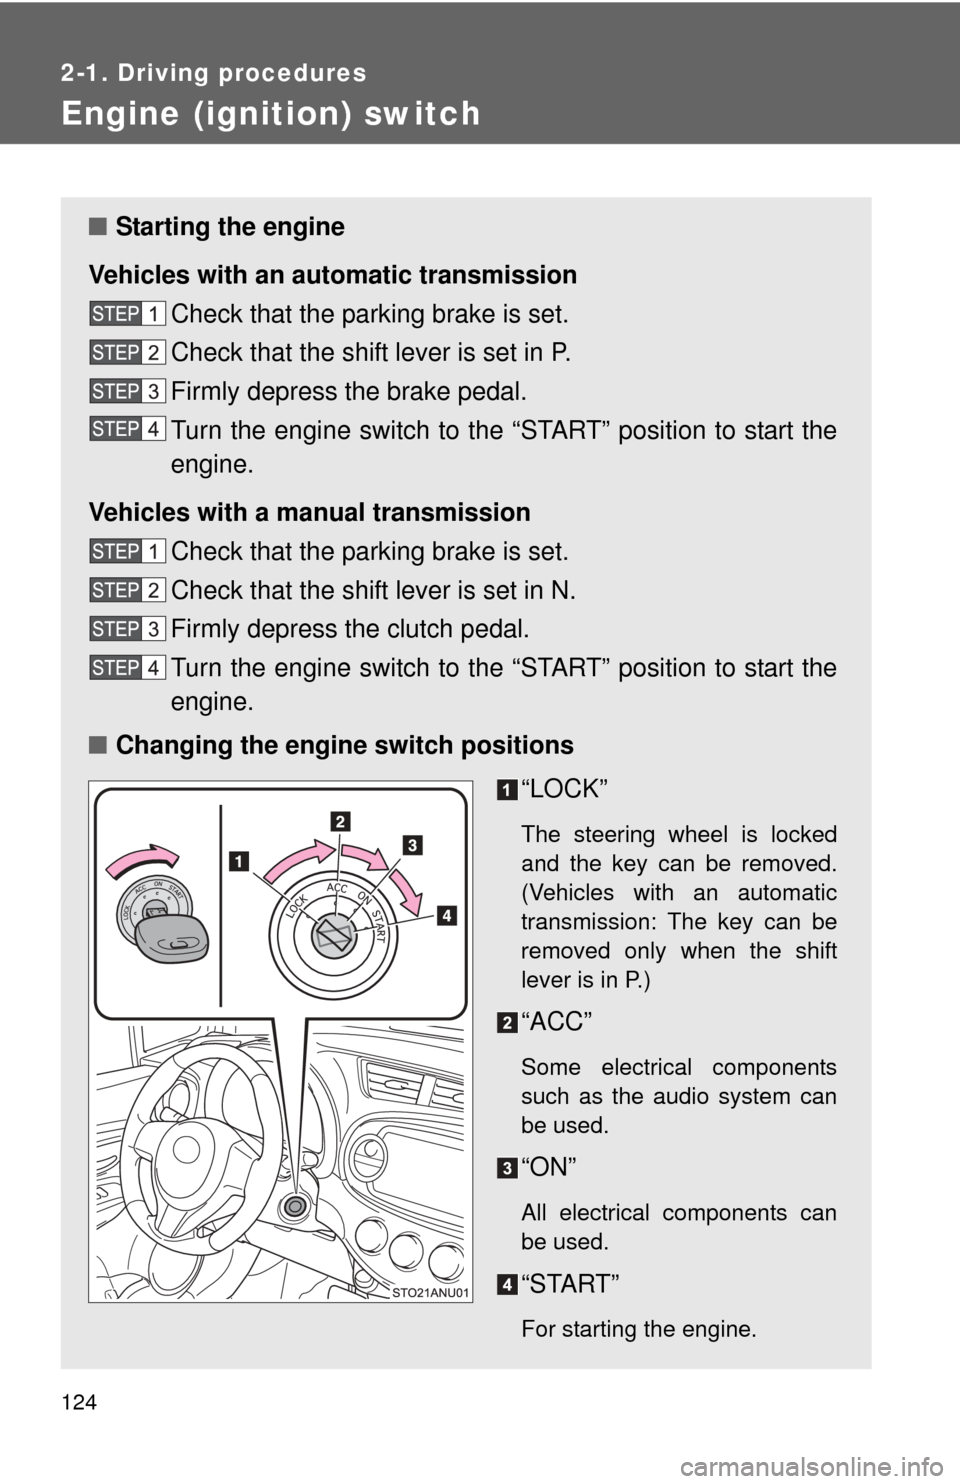 TOYOTA YARIS 2012 3.G Owners Manual 124
2-1. Driving procedures
Engine (ignition) switch 
■Starting the engine
Vehicles with an au tomatic transmission
Check that the parking brake is set.
Check that the shift lever is set in P.
Firml